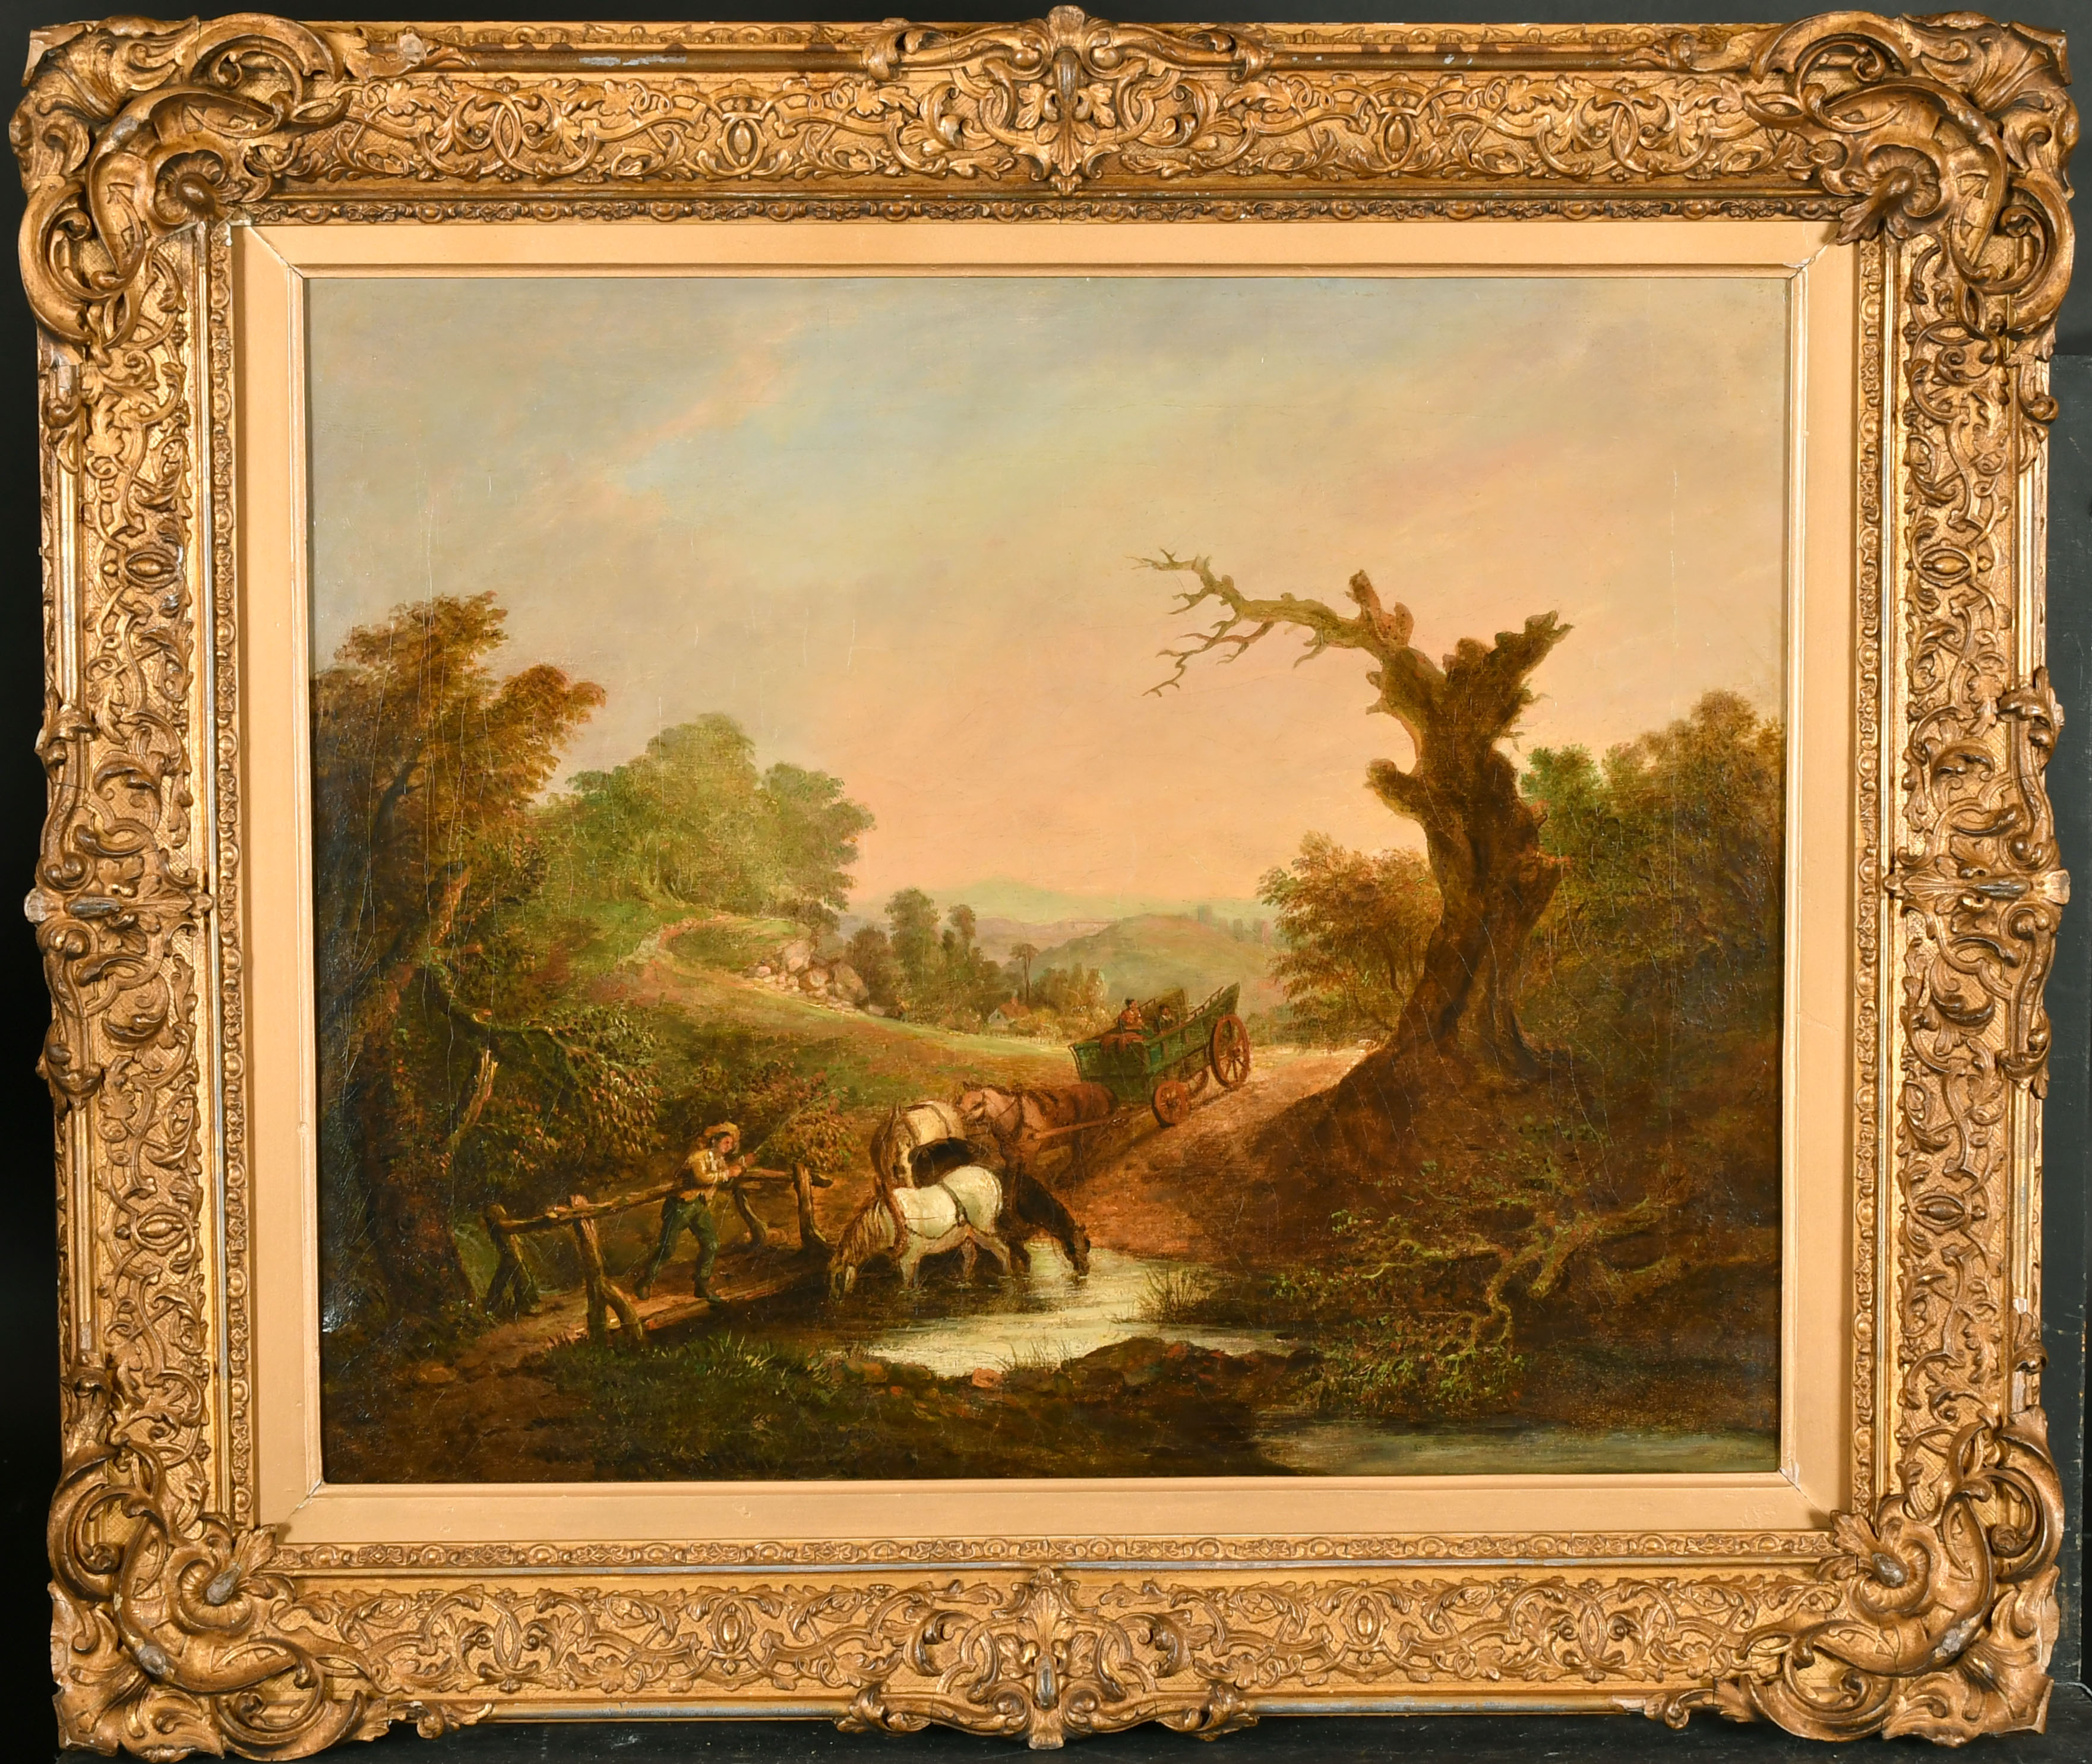 19th Century English School. Horses Watering in a River, Oil on canvas, 17" x 21" (43.2 x 53.3cm) - Image 2 of 3